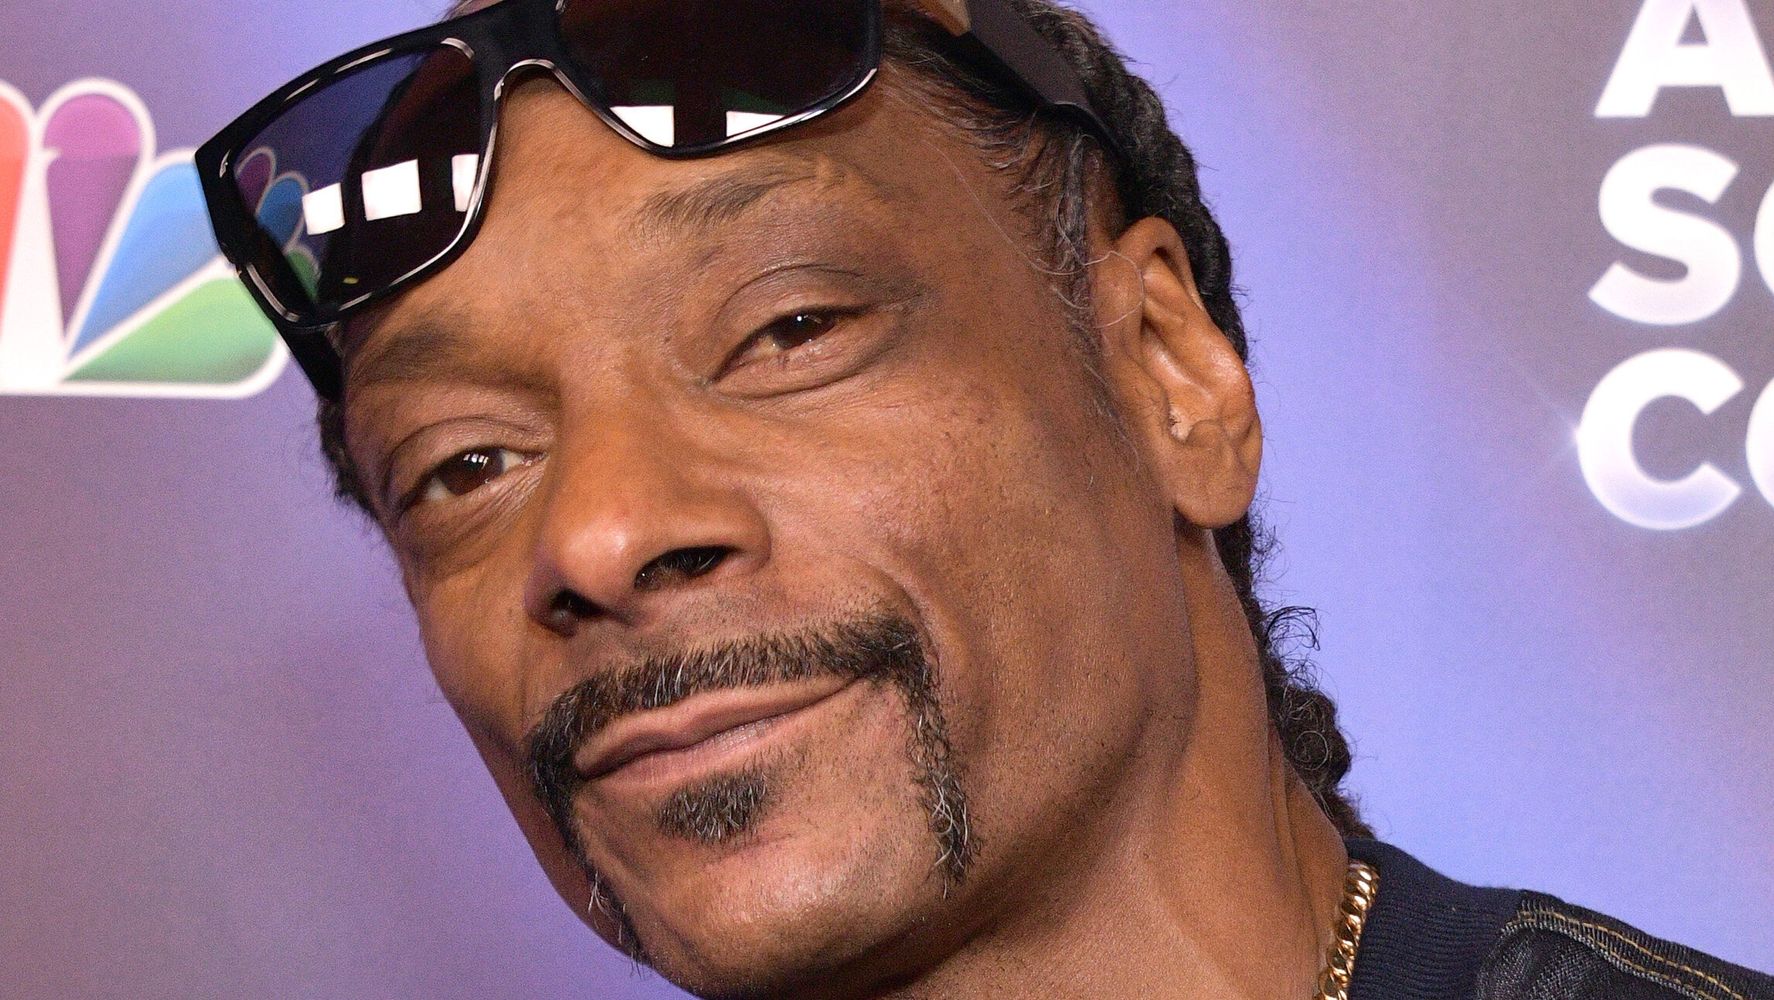 Woman Who Accused Snoop Dogg Of Sexual Assault Drops Her Civil Suit